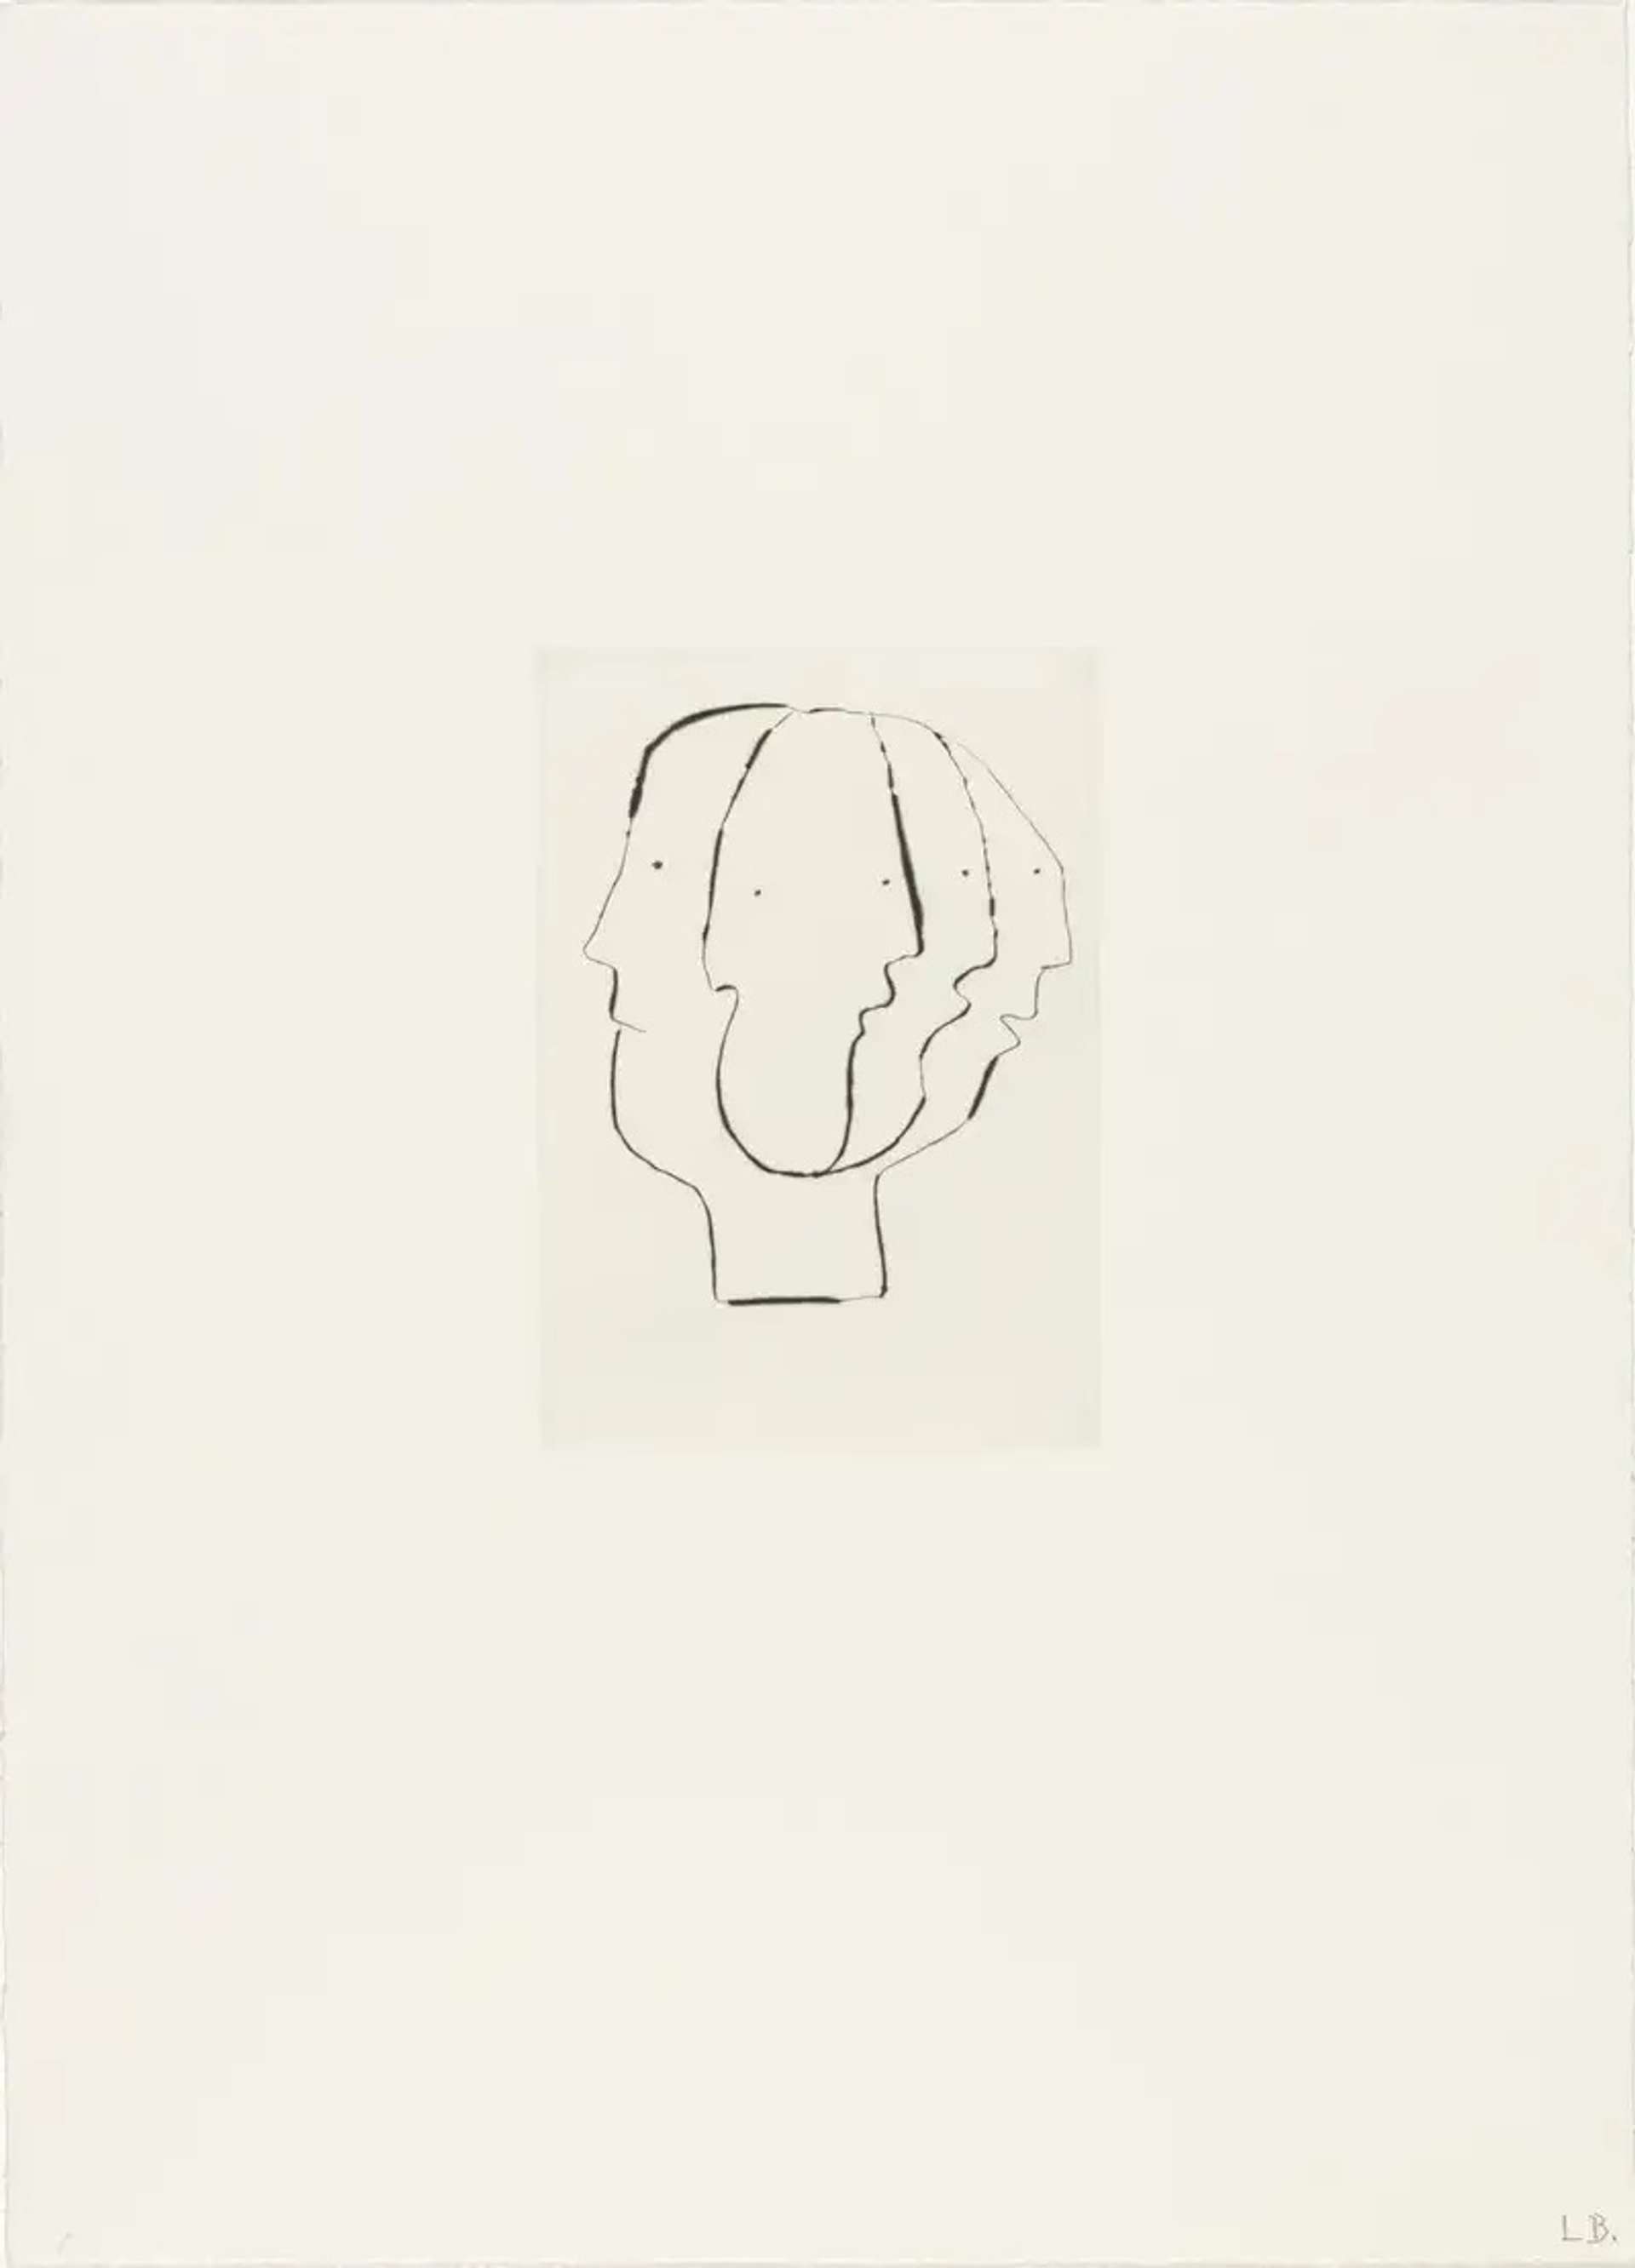 Louise Bourgeois Untitled No. 1. A monochromatic etching of a depiction of a face with four side profile perspectives.